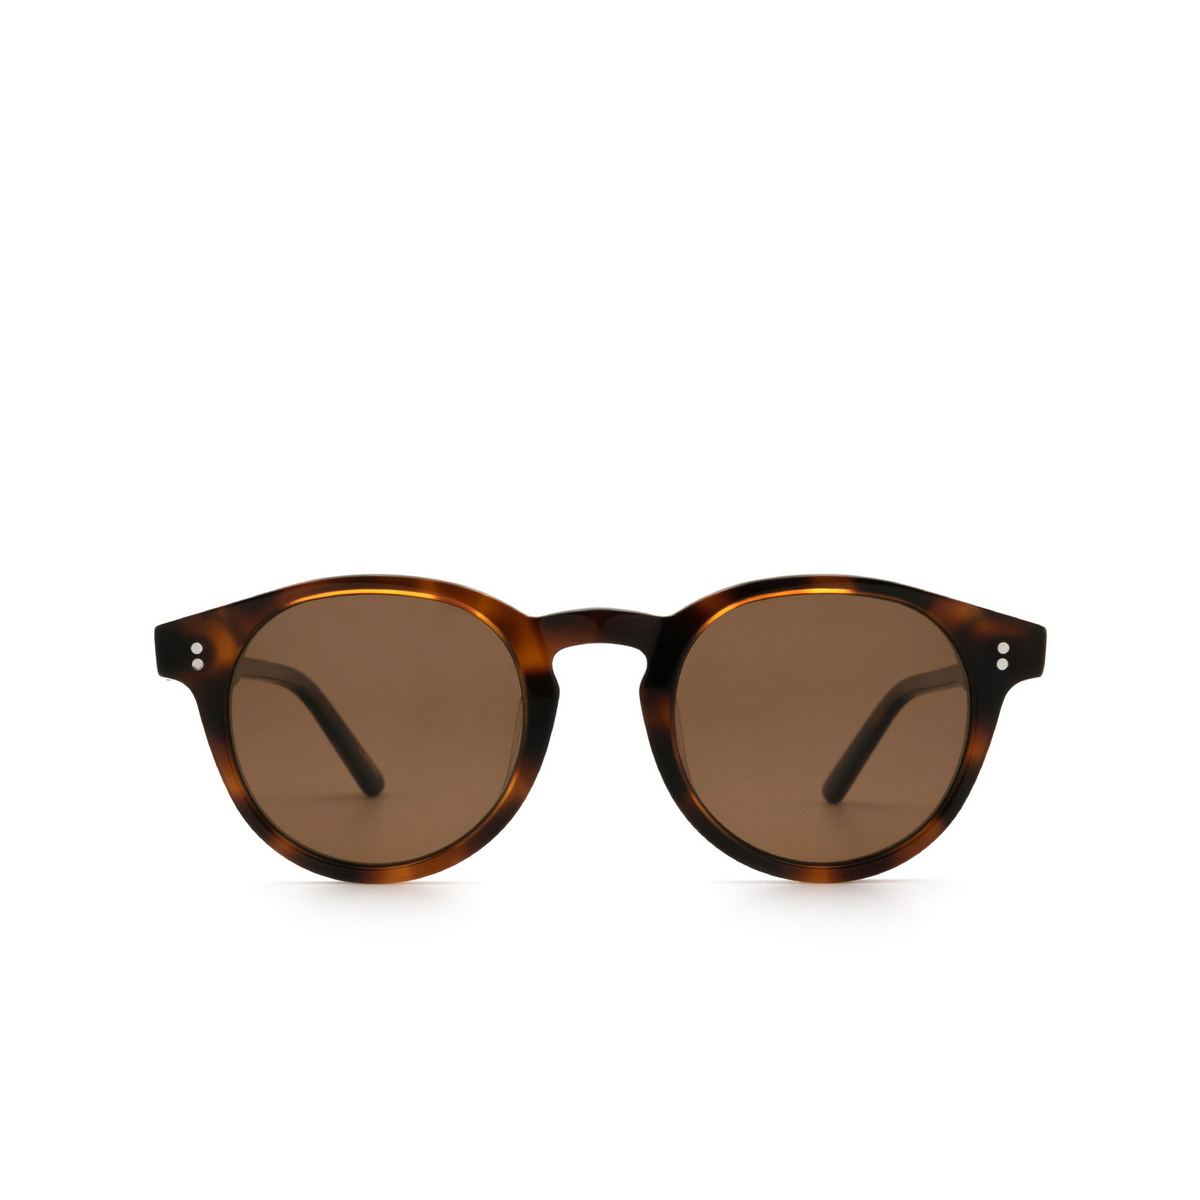 Chimi® Round Sunglasses: 03 color Tortoise - front view.